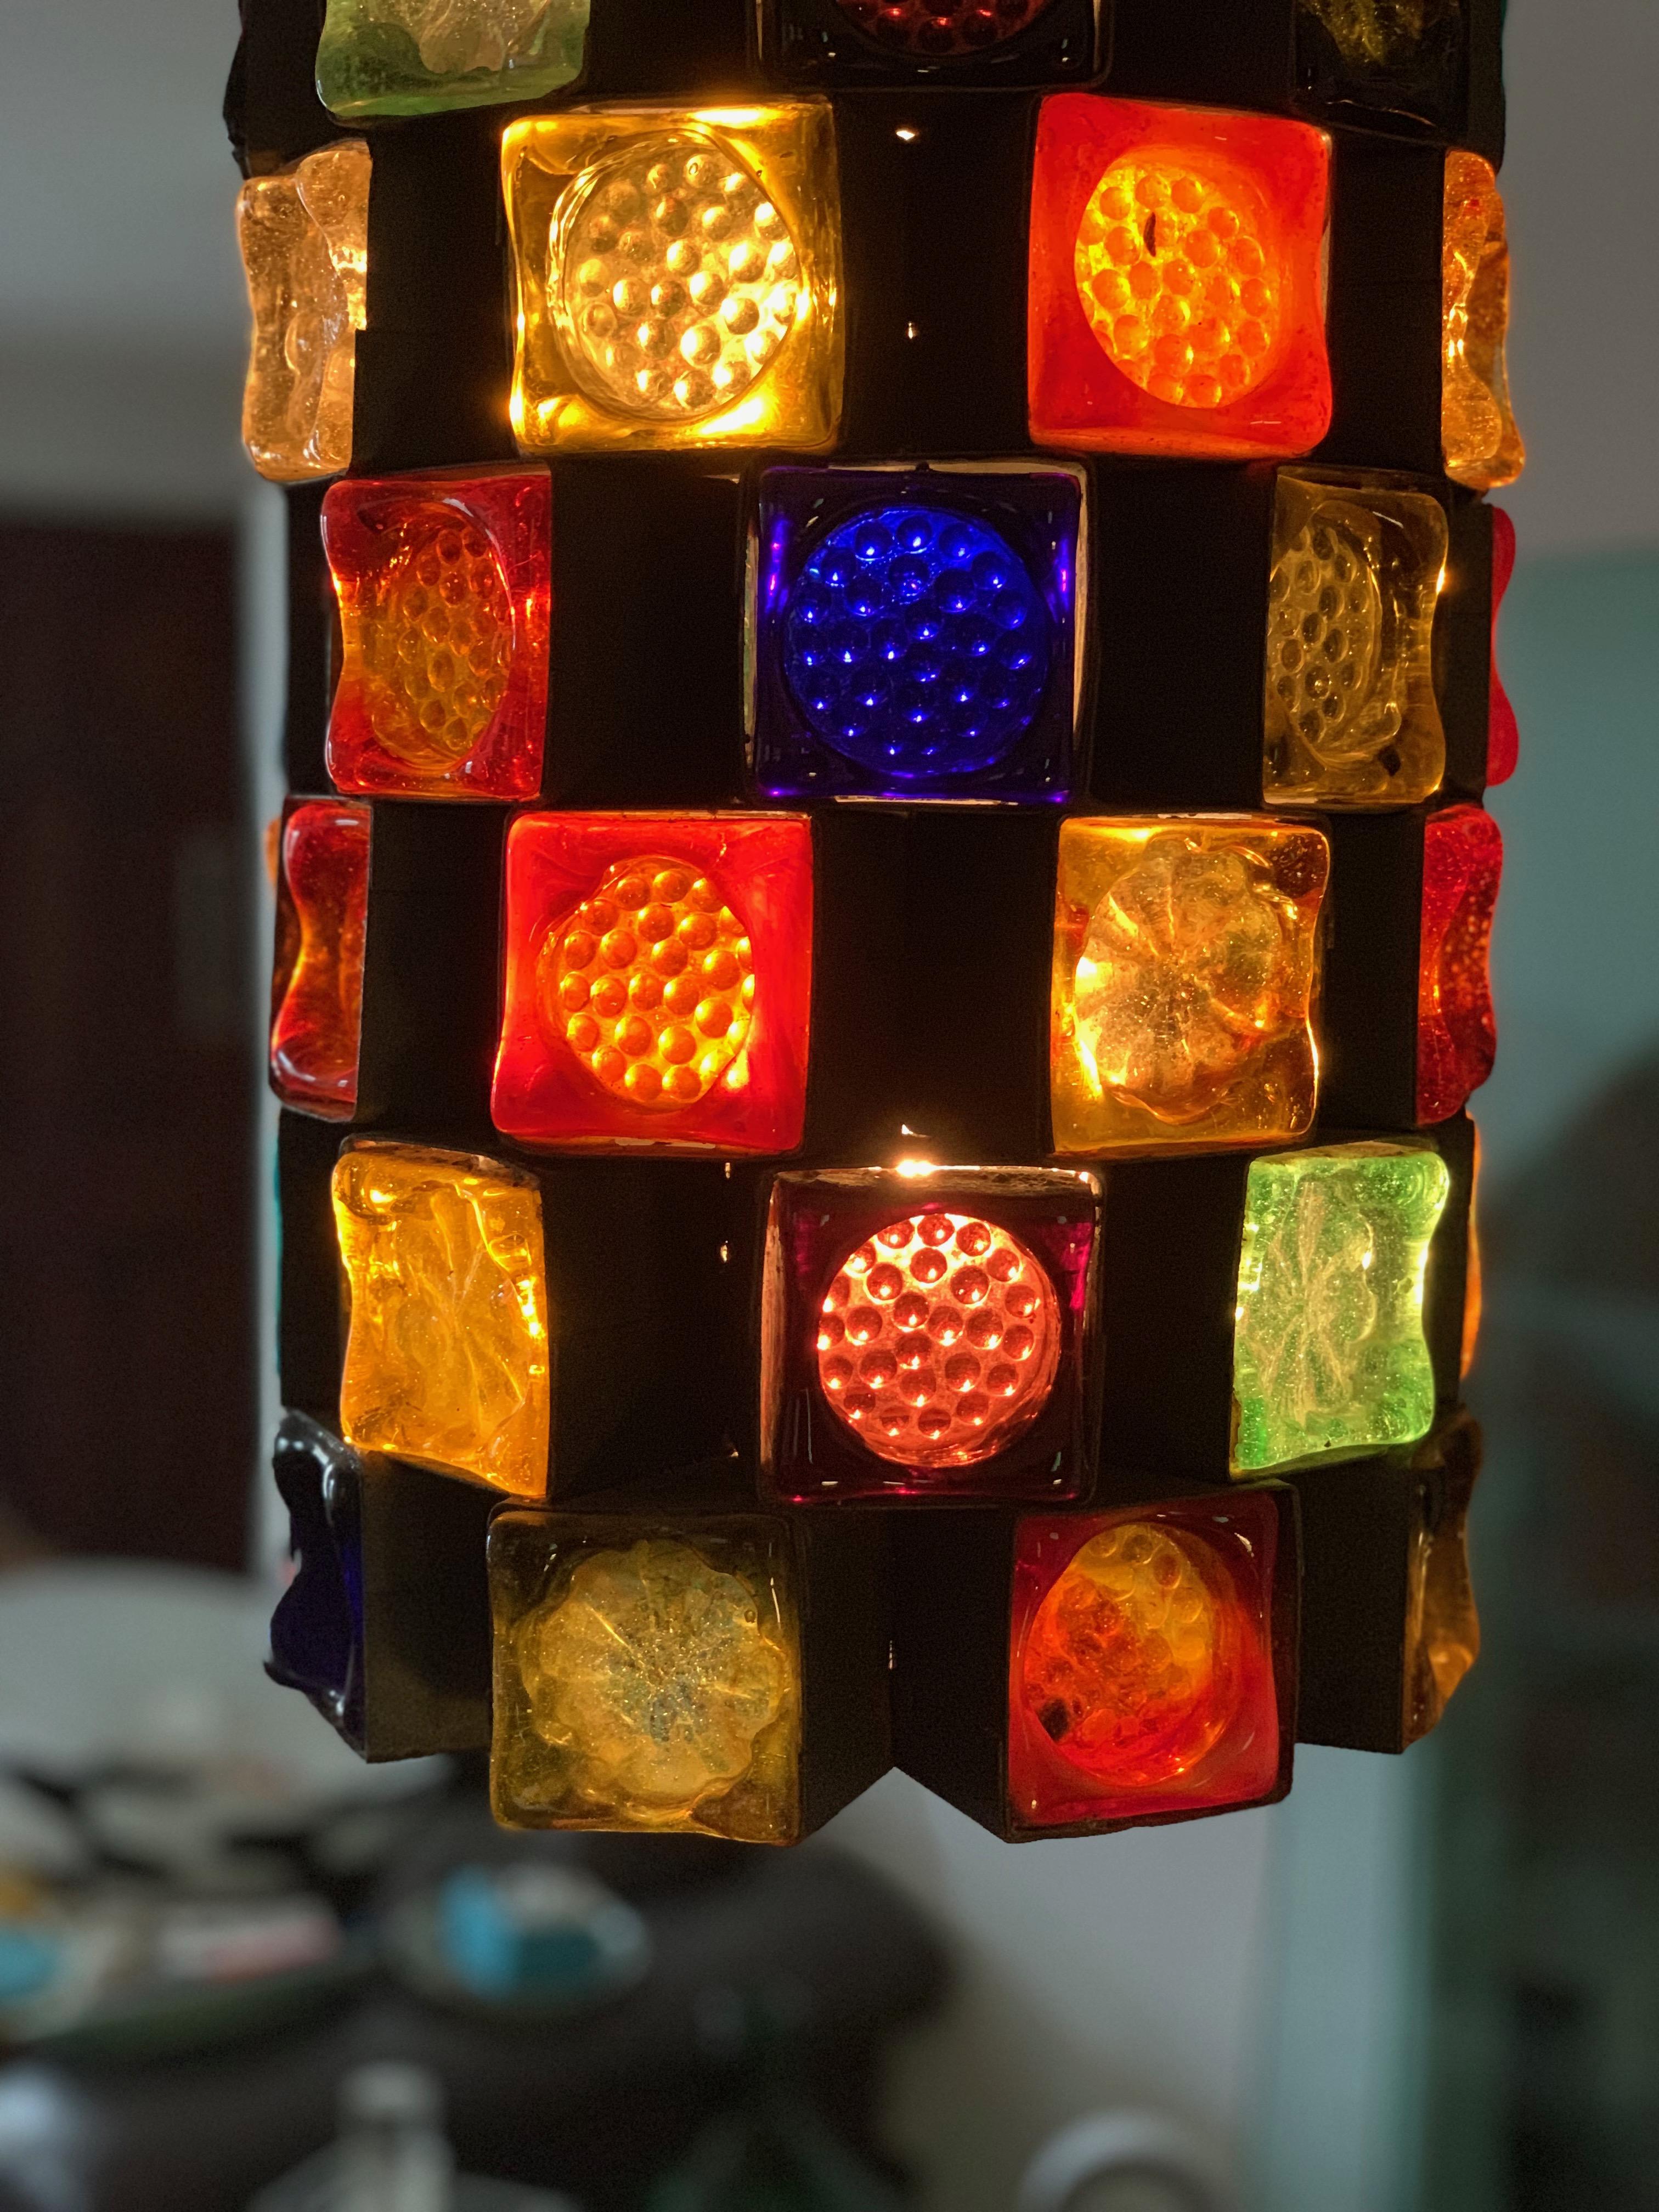 Midcentury Brutalist or forged metal and stained glass pendant light fixture by Felipe Delfinger for Feders, 1970s Latin American Modern.

Stained glass cubes with uniquely patterned surfaces, each in its own forged metal pod, set together as a